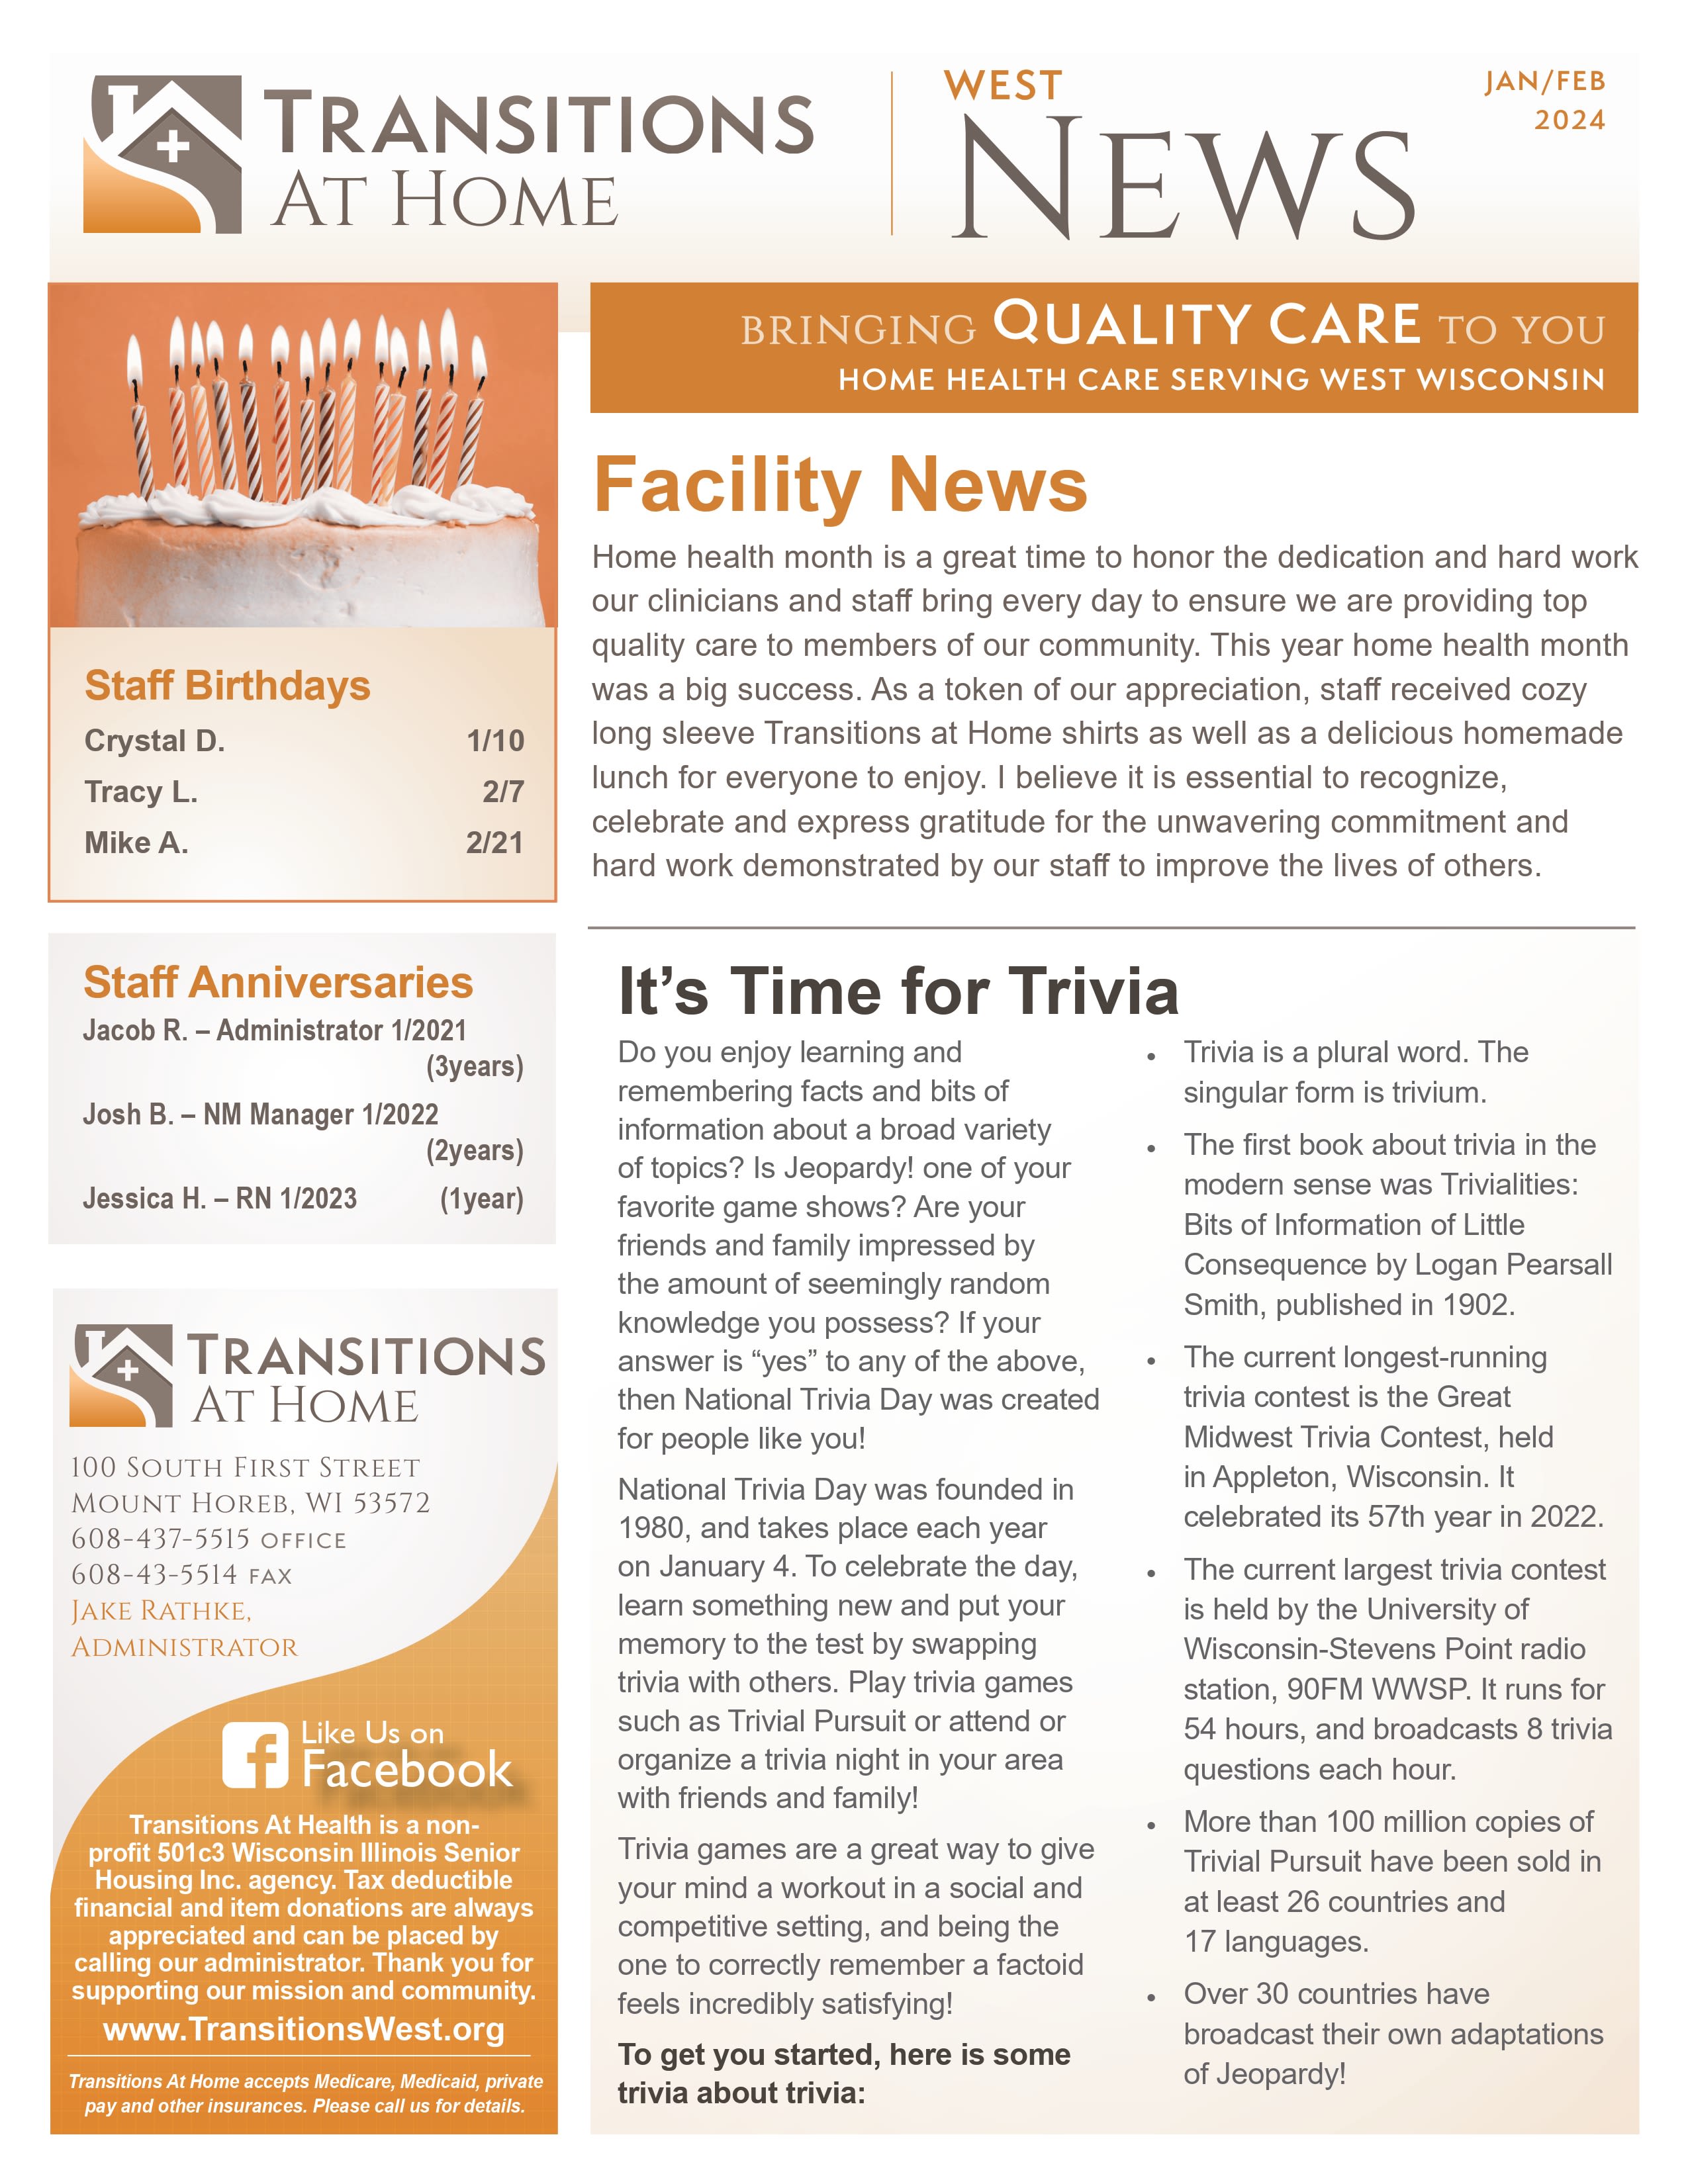 January 2024 Newsletter at Transitions At Home - West in Mount Horeb, Wisconsin